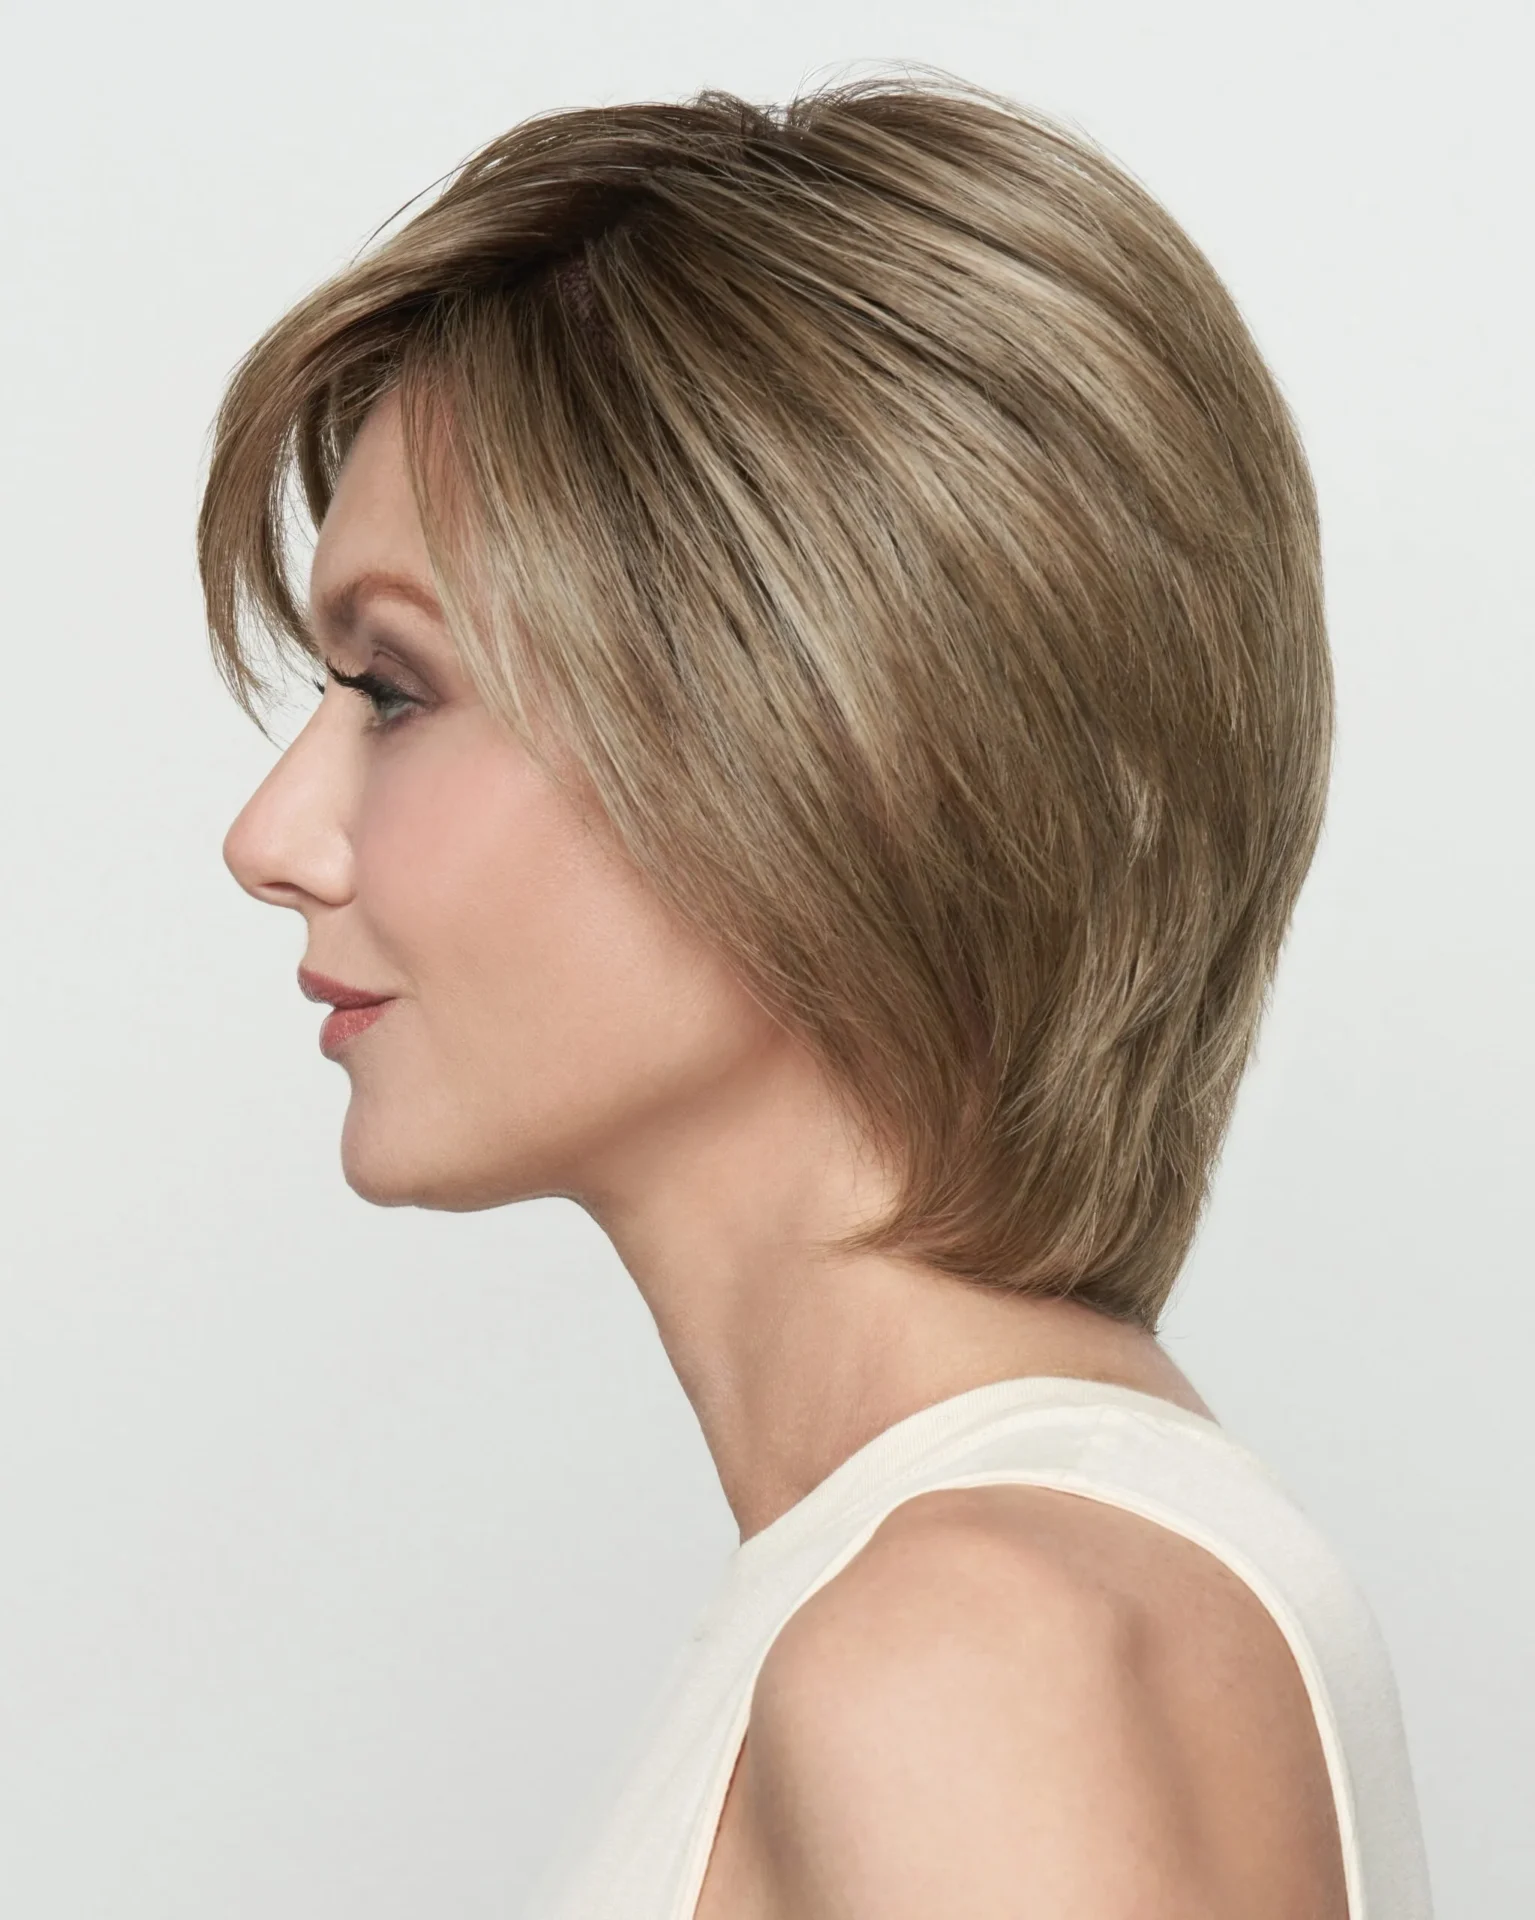 A woman's side view of a layered wig with bangs.